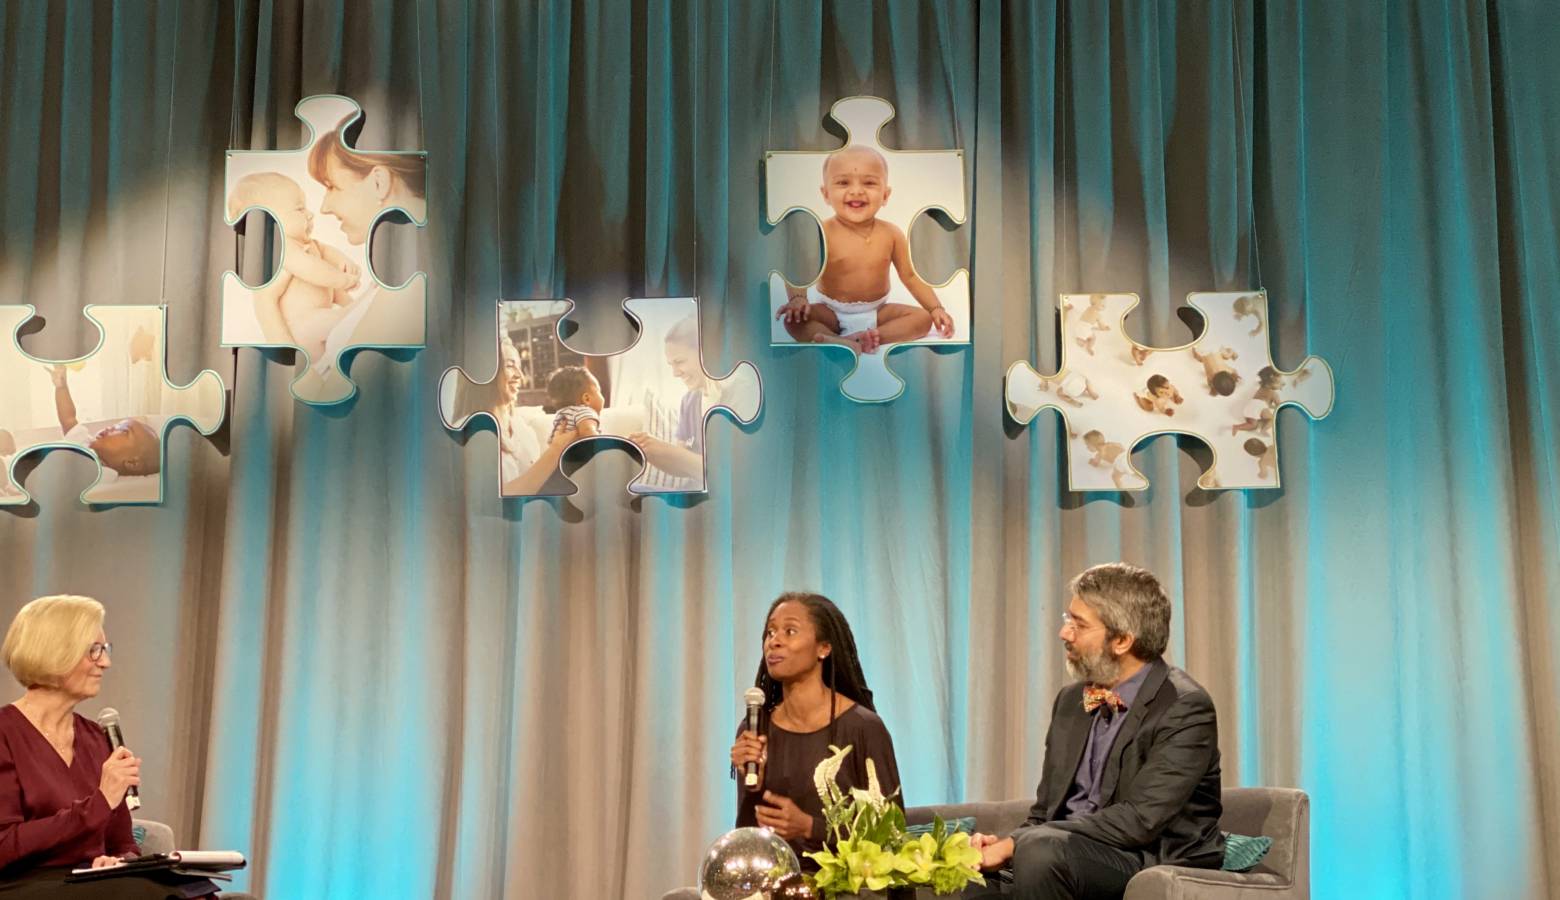 State Health Commissioner Kris Box discusses infant mortality with Dr. Nzinga Harrison and Dr. Dipesh Navsaria at the Labor of Love Summit Dec. 11. (Darian Benson/IPB News)